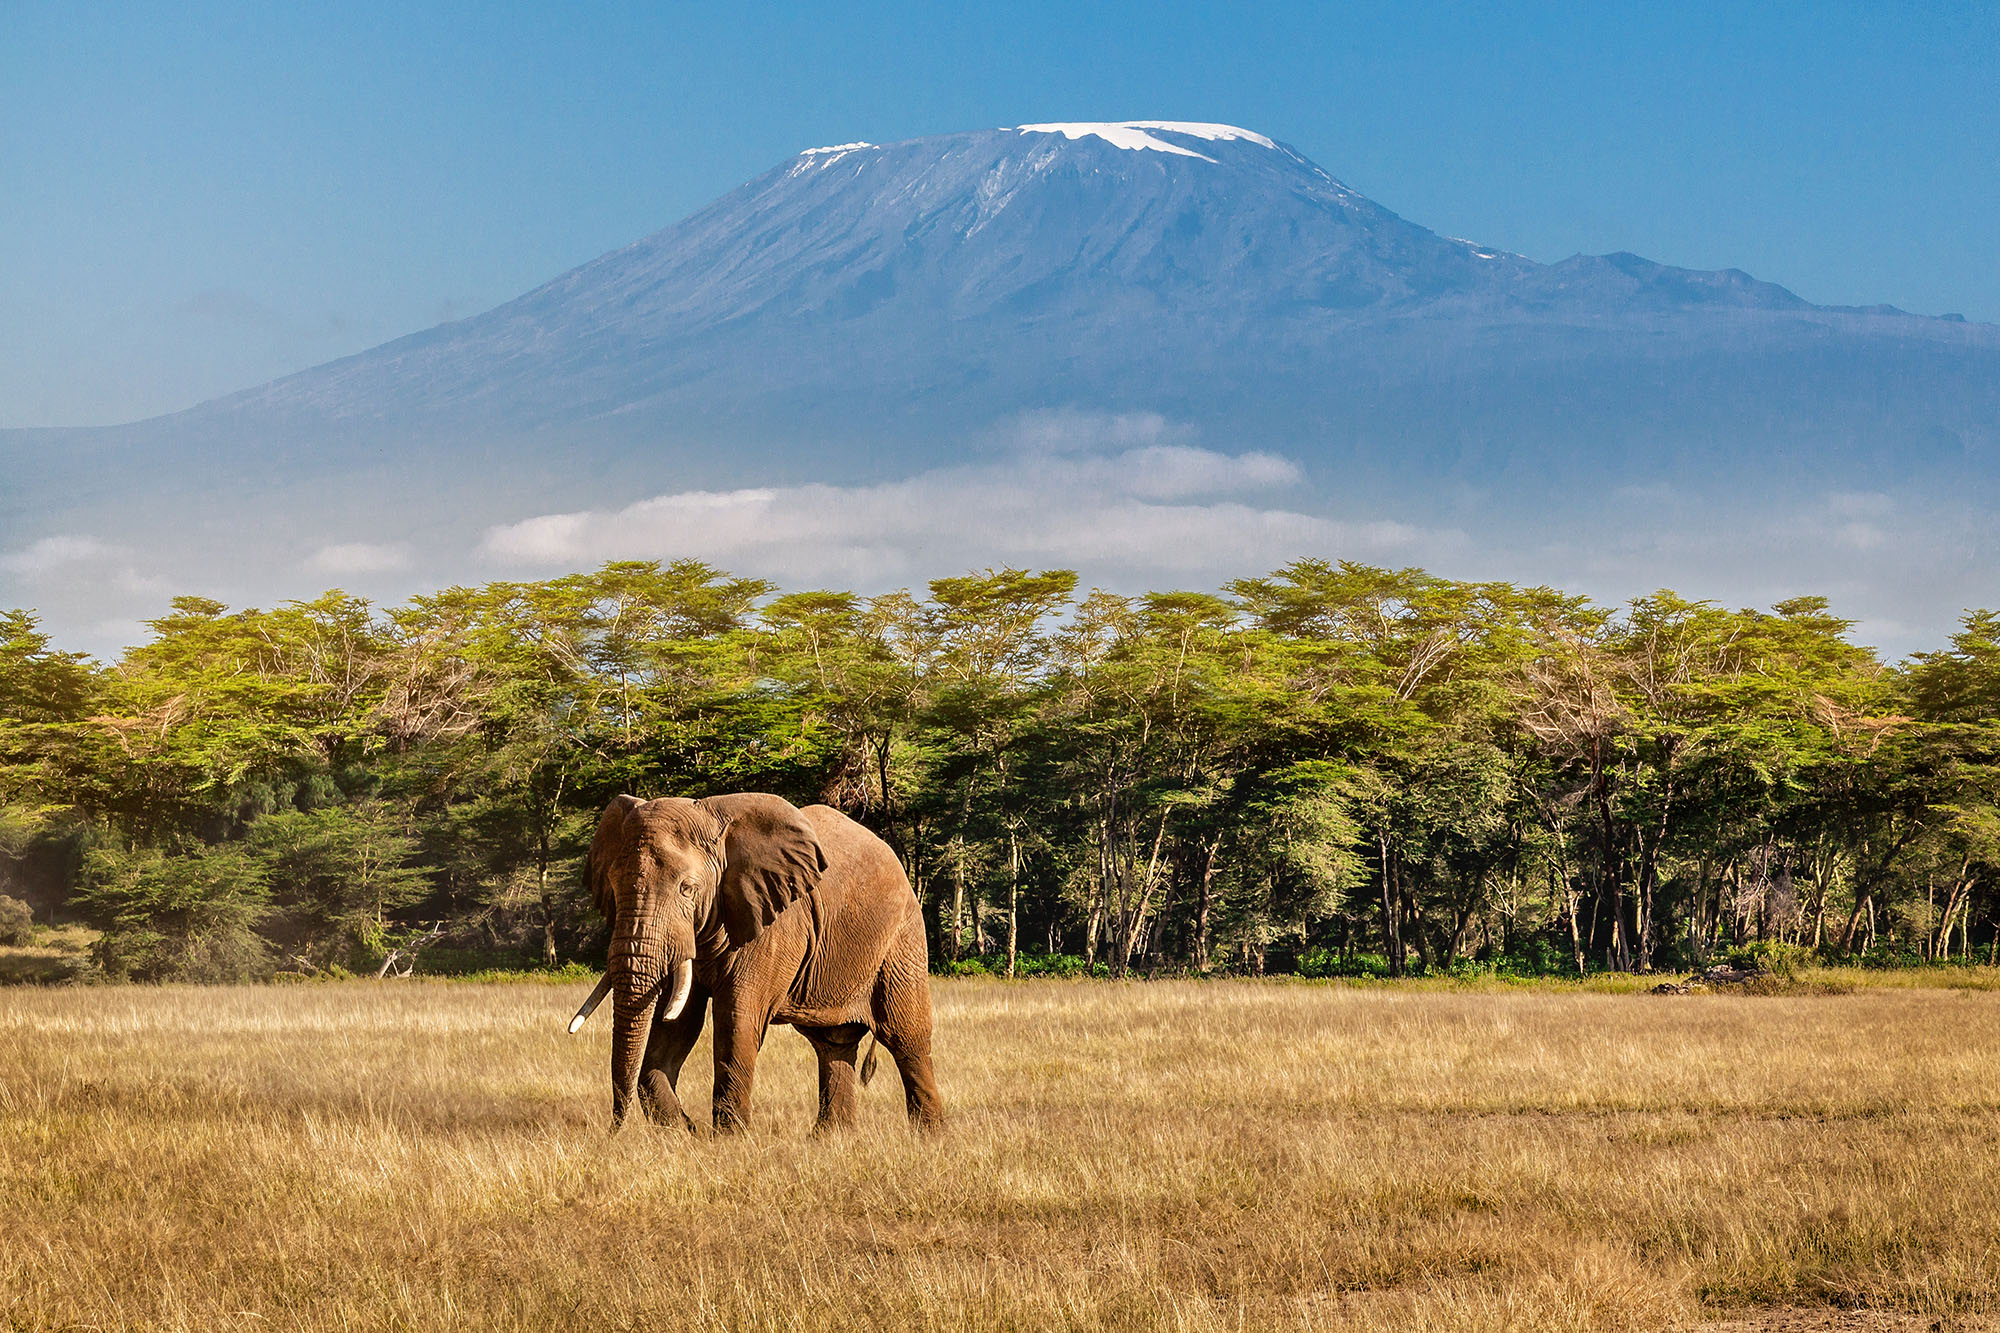 Mount Kilimanjaro with an elephant in the foreground